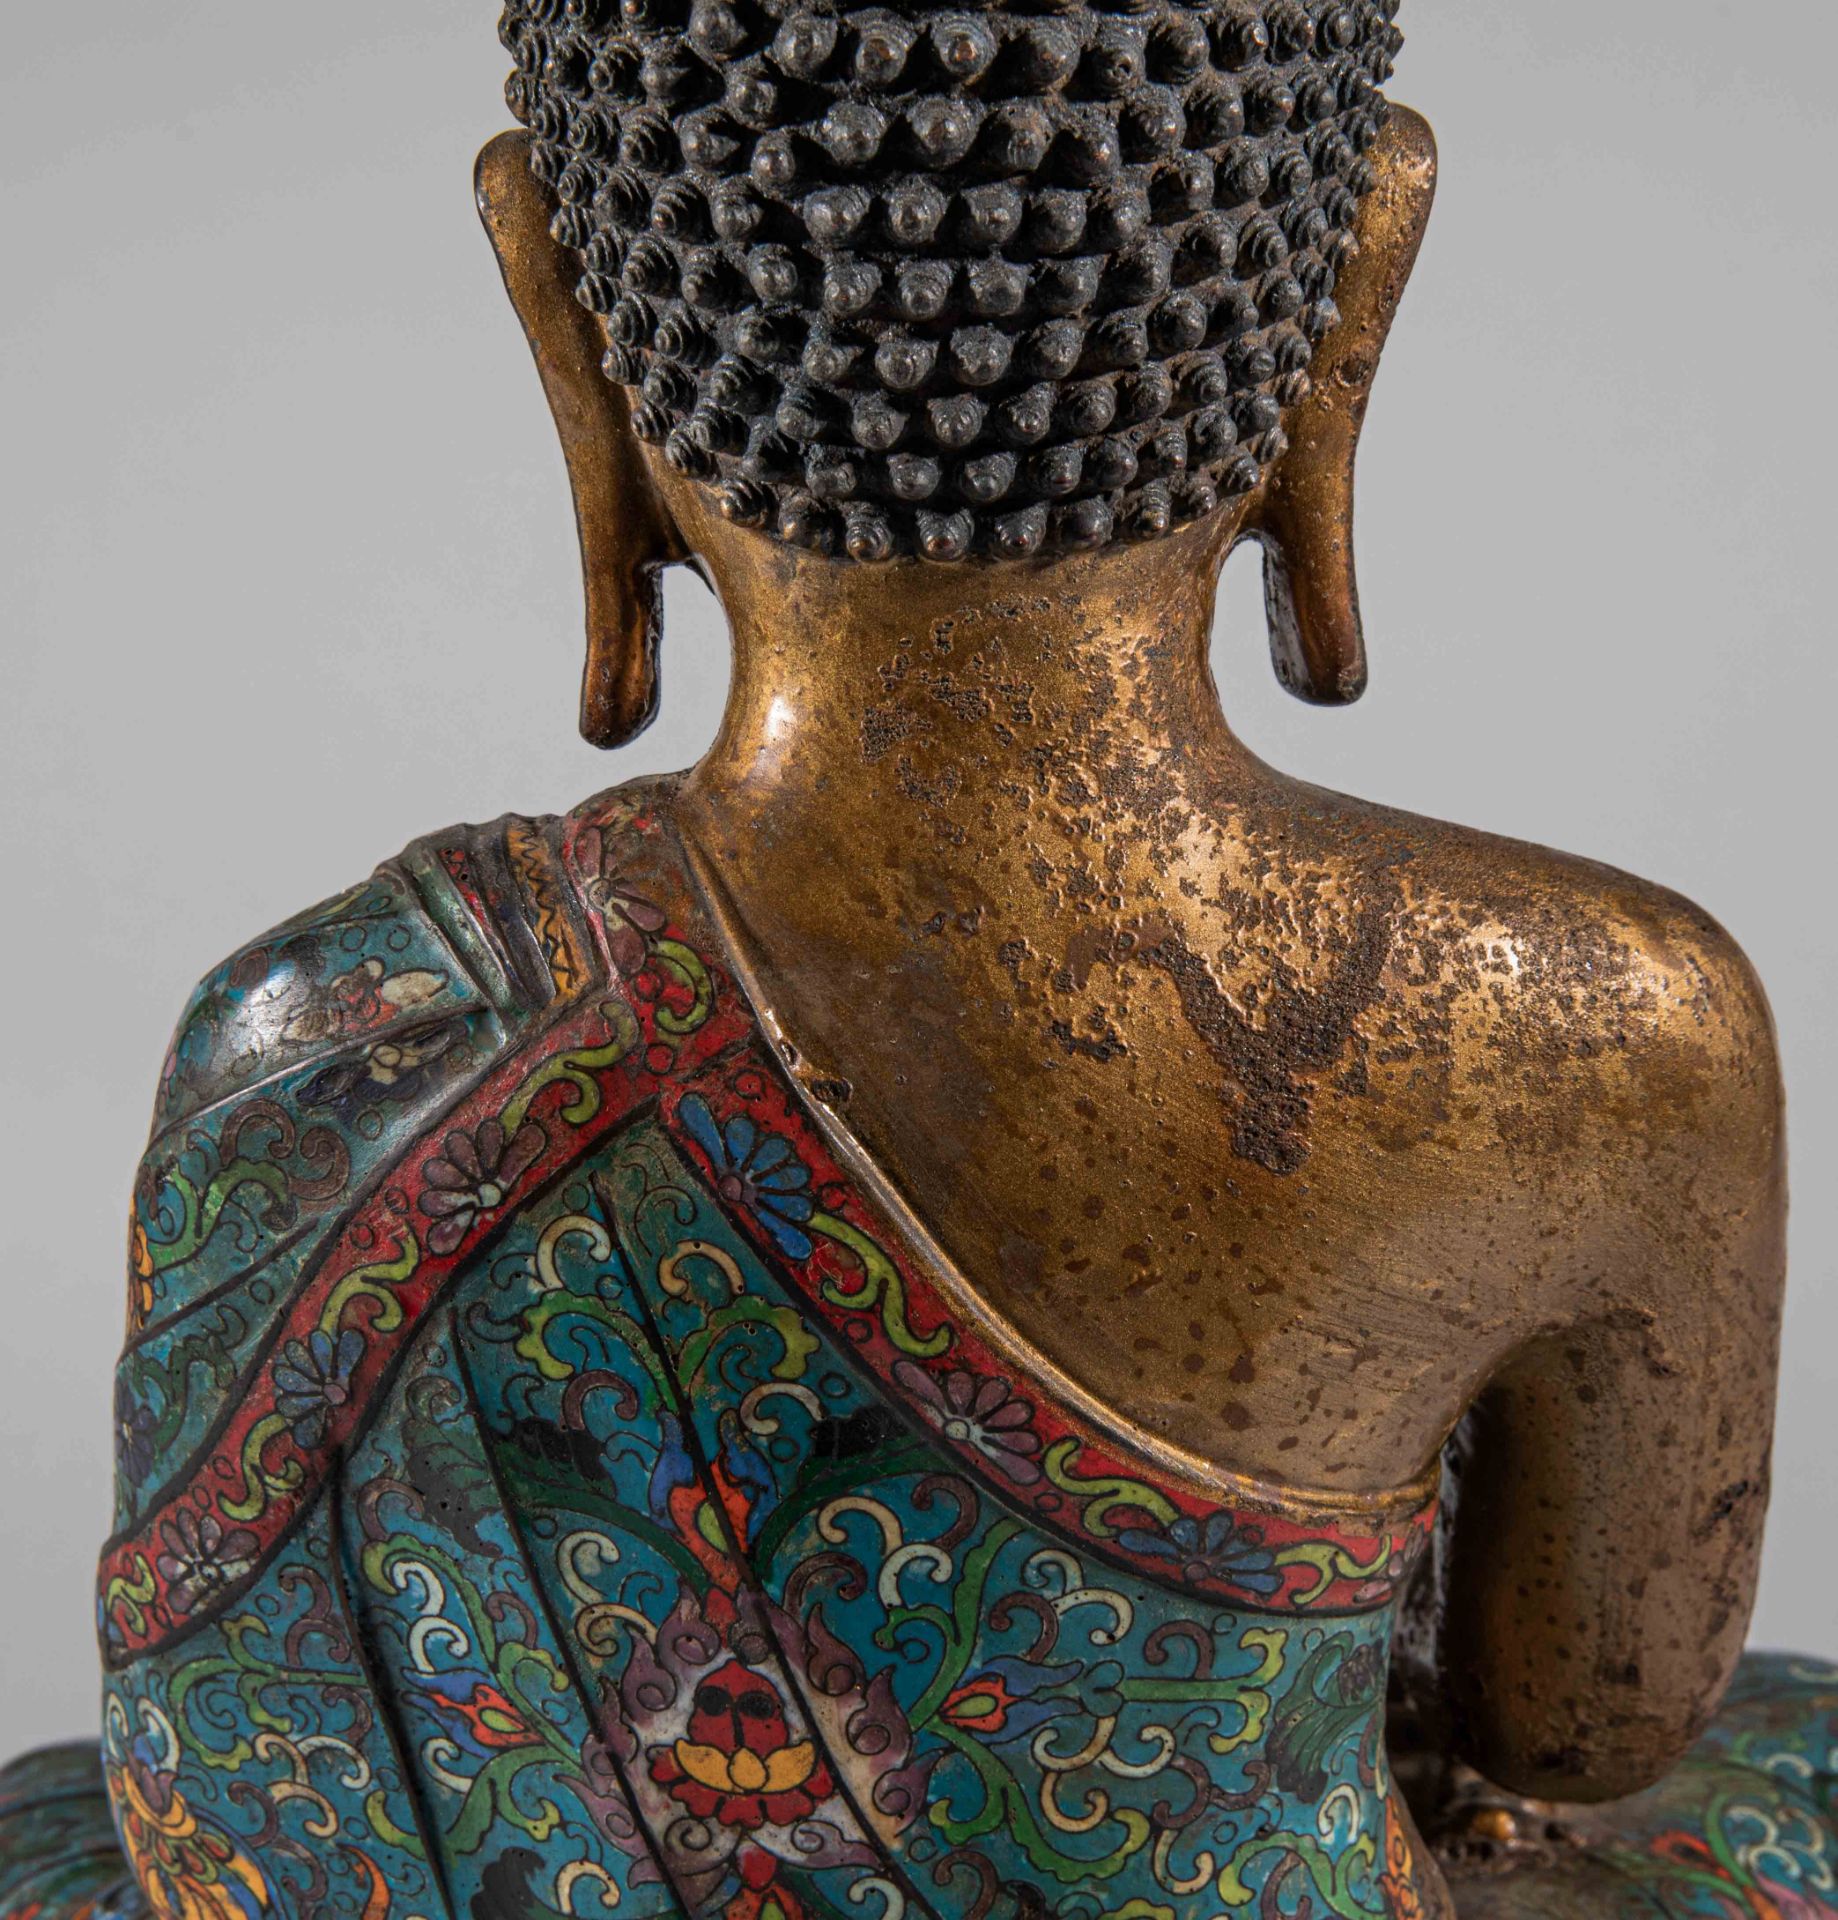 Chinese Qing Dynasty Cloisonne Buddha Statue - Image 13 of 15